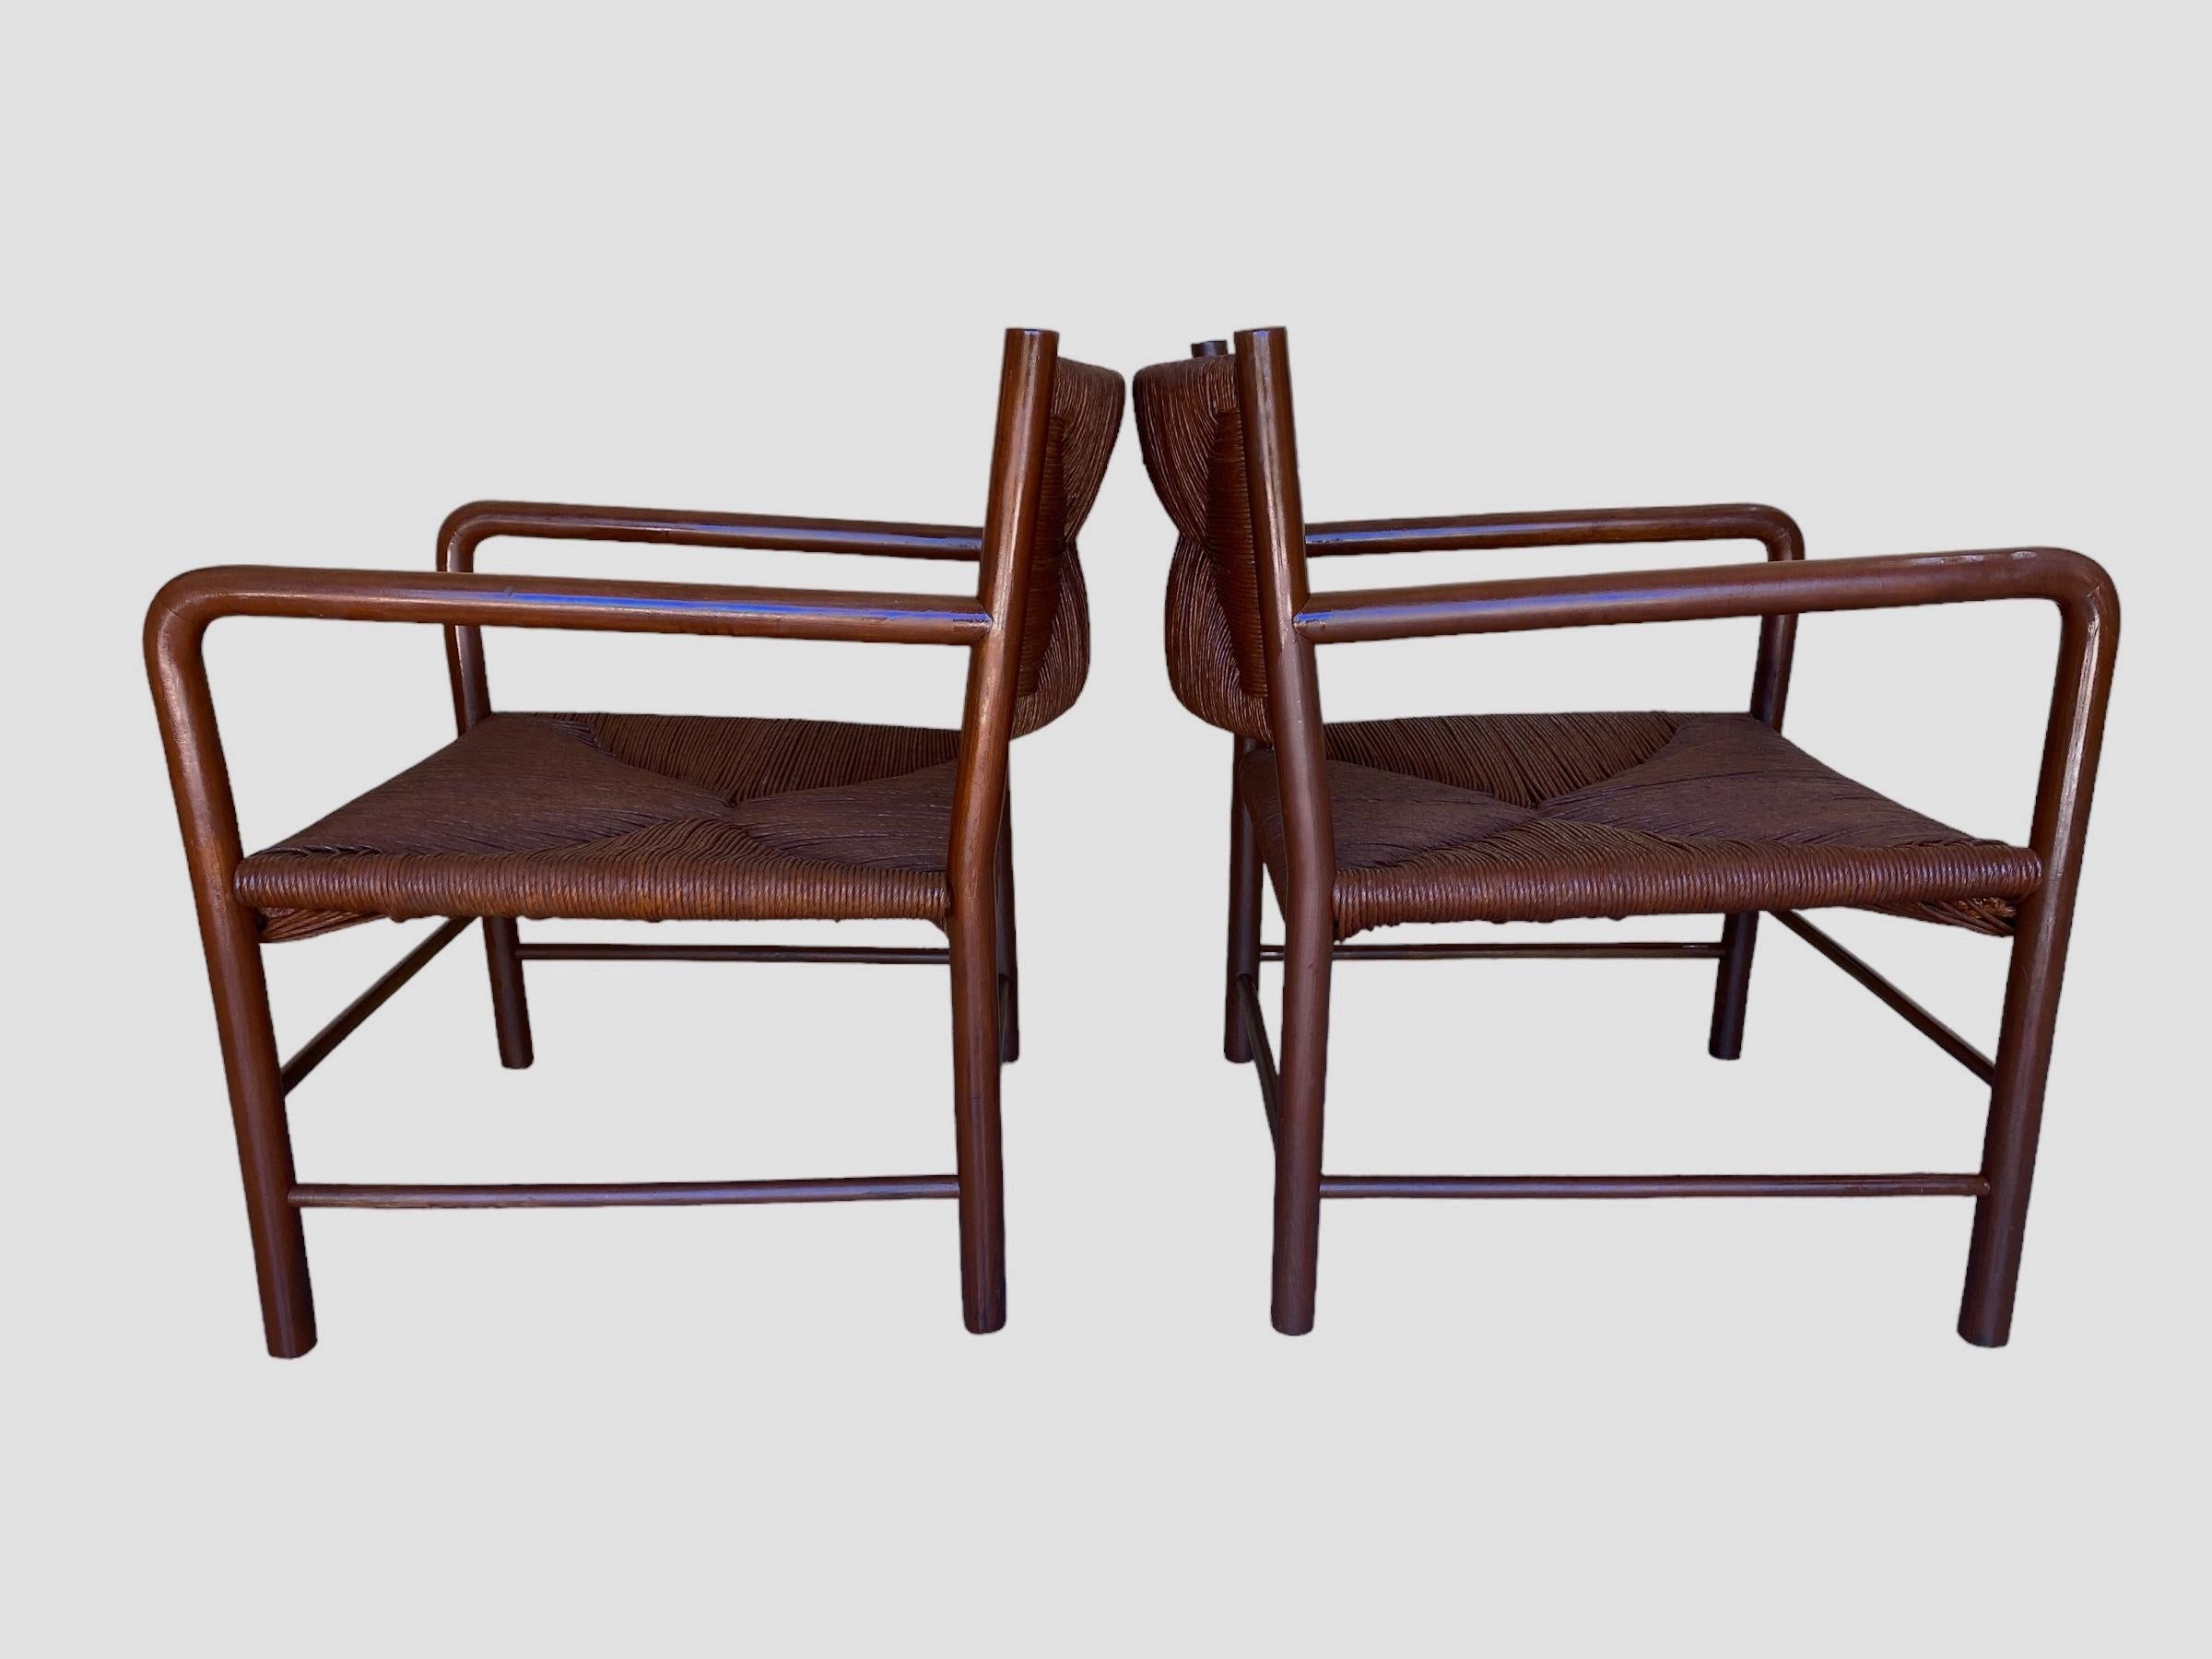 Pair of Emanuele Rambaldi Modernist Brown Lacquered Armchairs, Italy 1940s For Sale 4